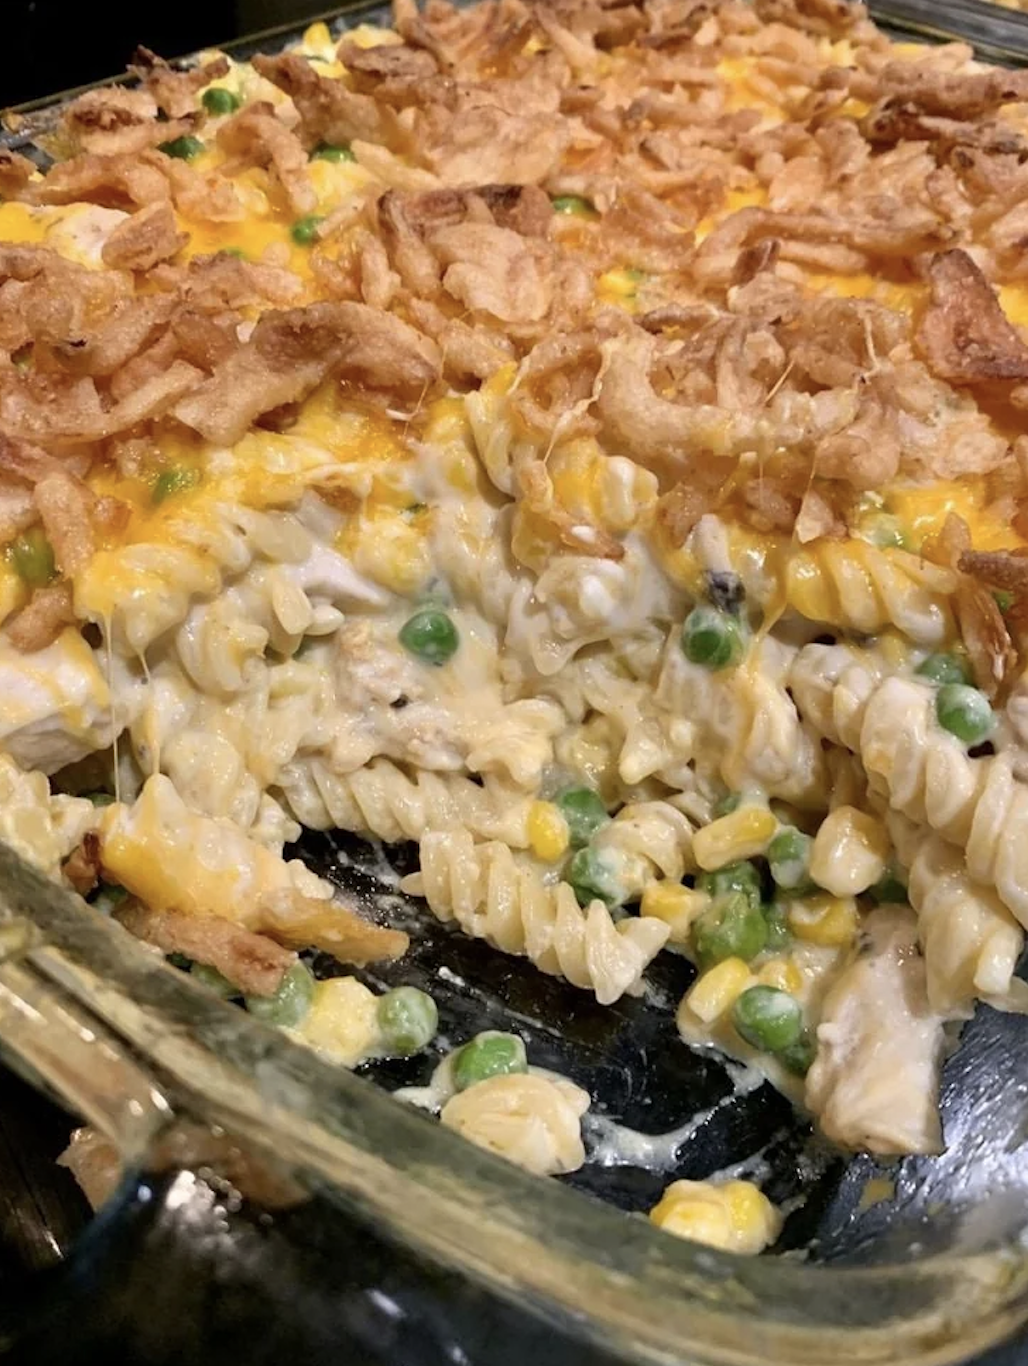 Baked casserole with corn, peas, melted cheese, and crispy onion toppings